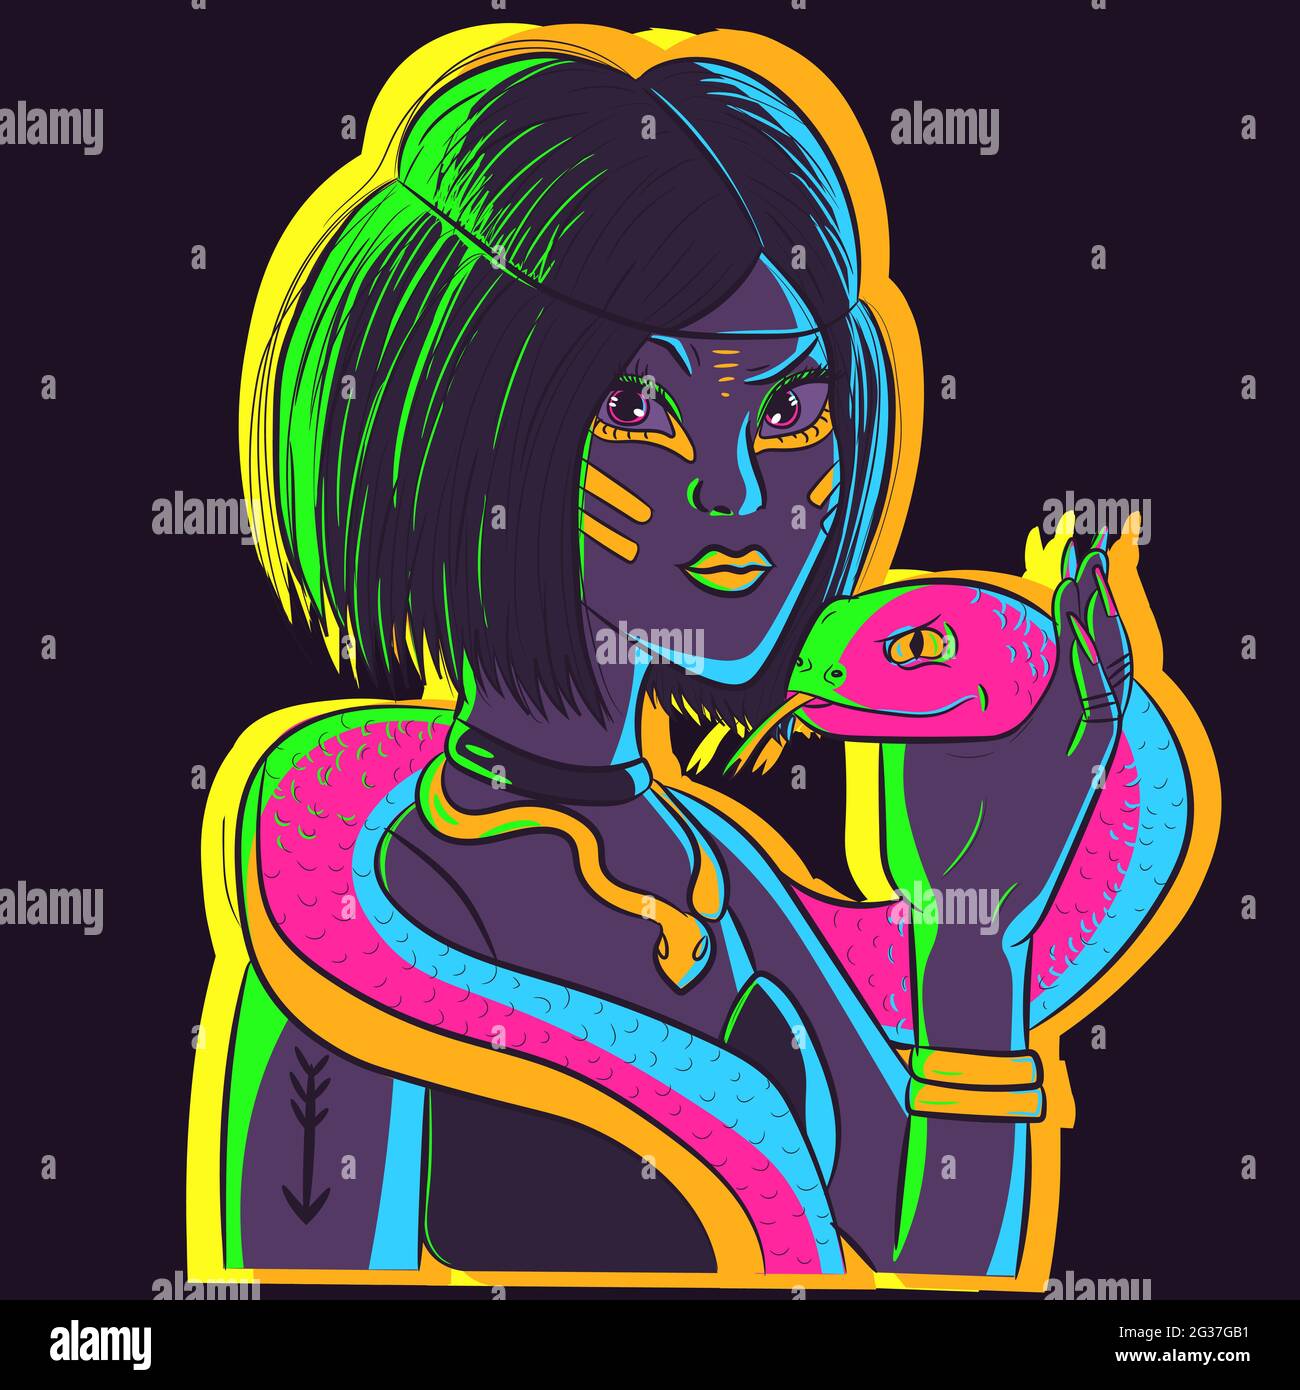 Tarot card conceptual art with a young woman taming a snake around her neck. Psychedelic neon illustration with surreal colors and a bohemian woman wi Stock Vector